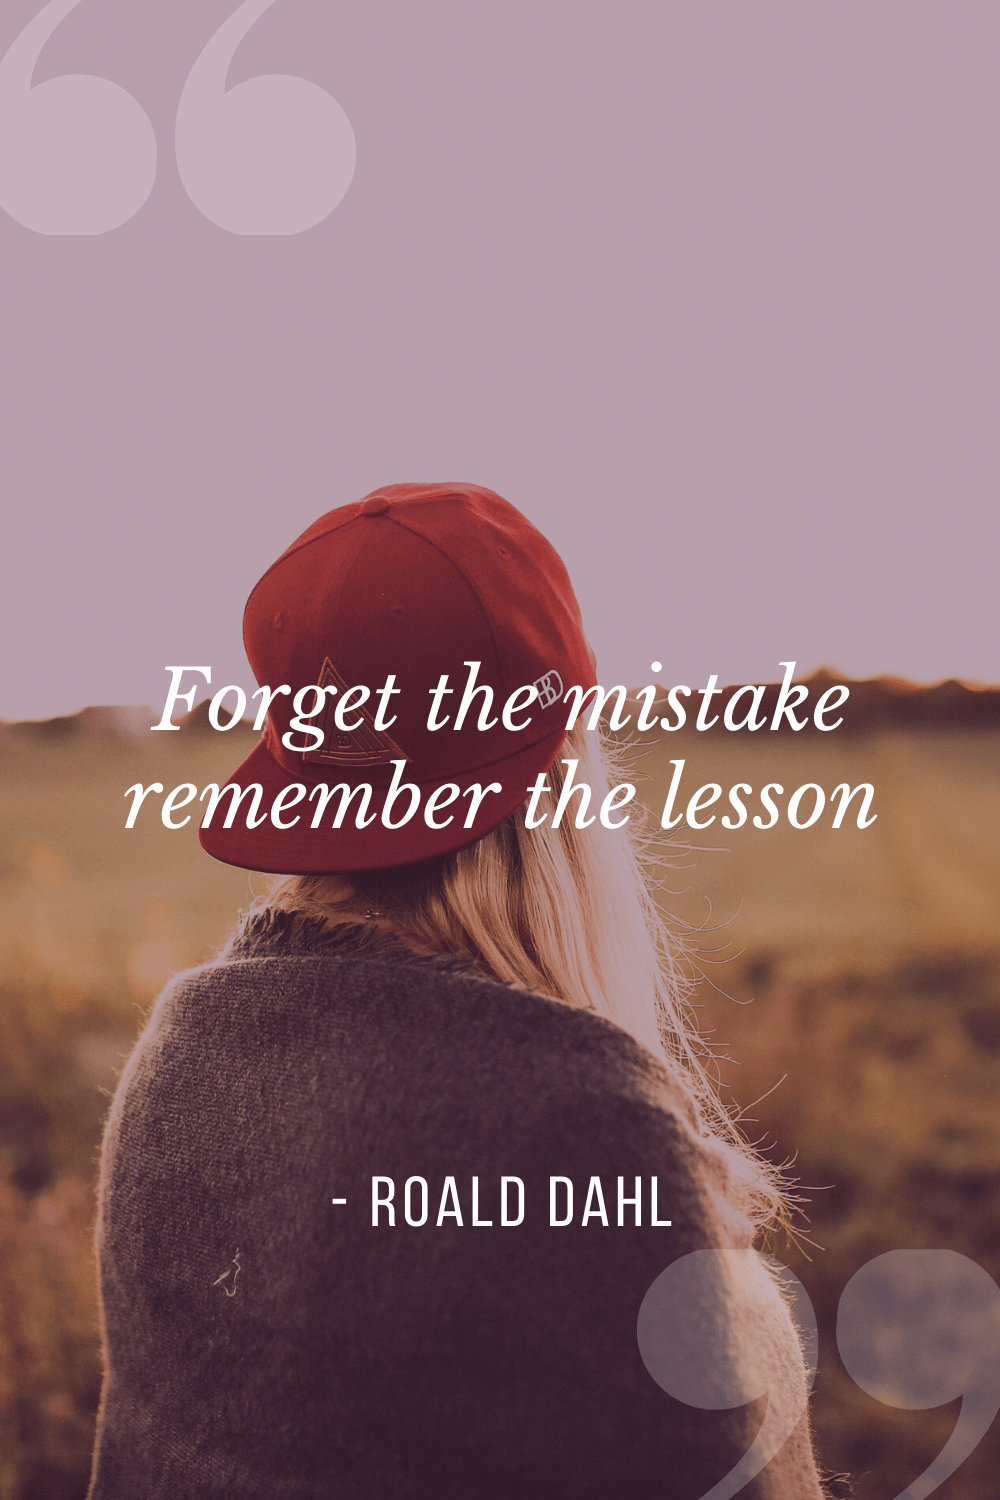 “Forget the mistake, remember the lesson”, Roald Dahl